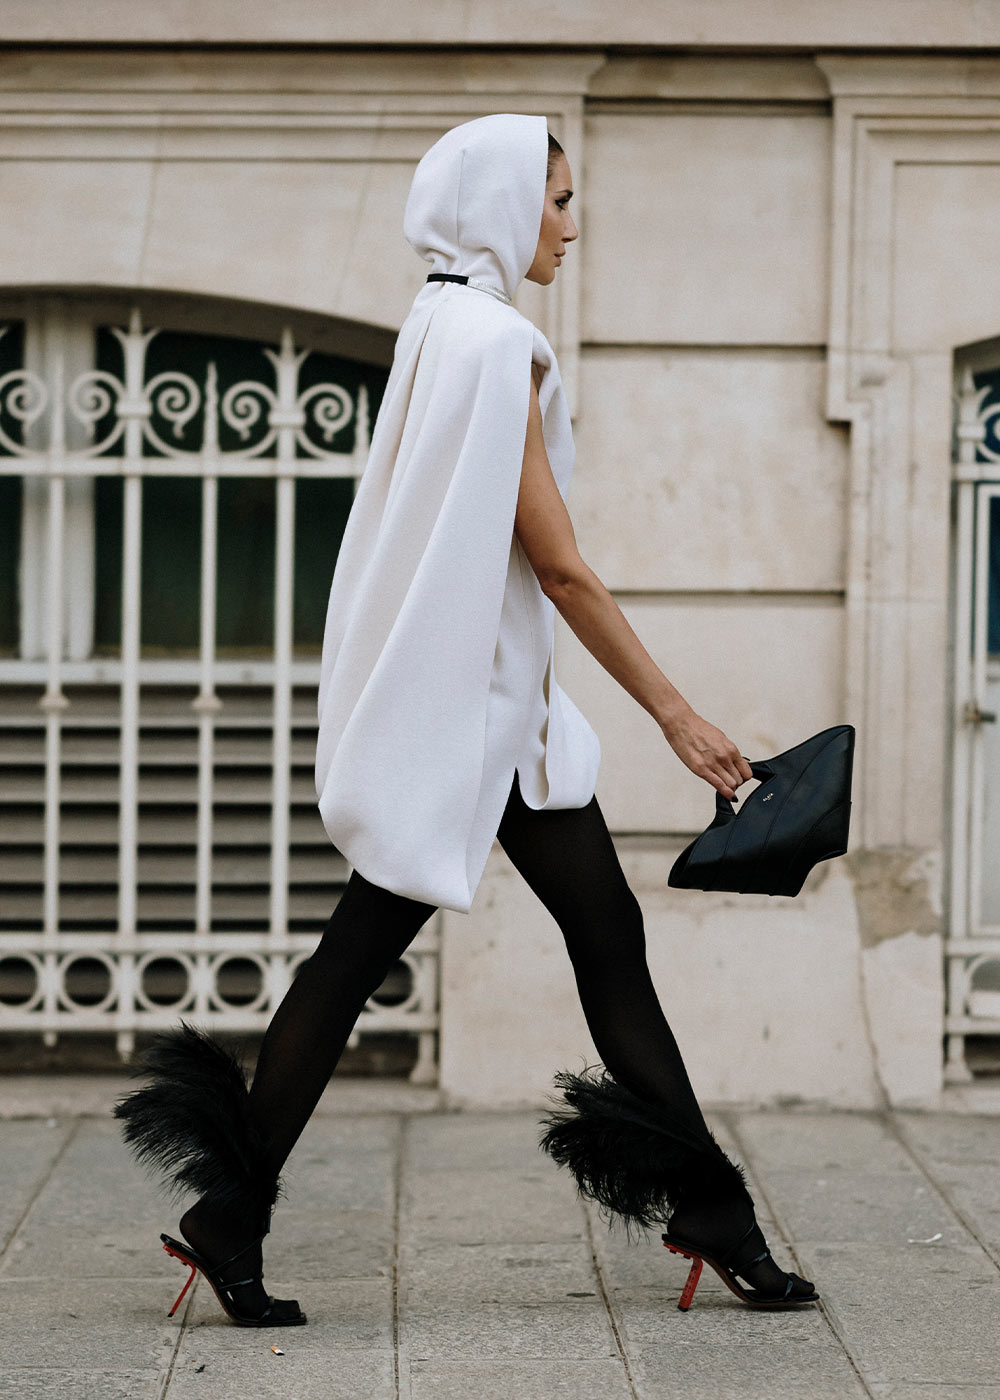 Street style: black and white